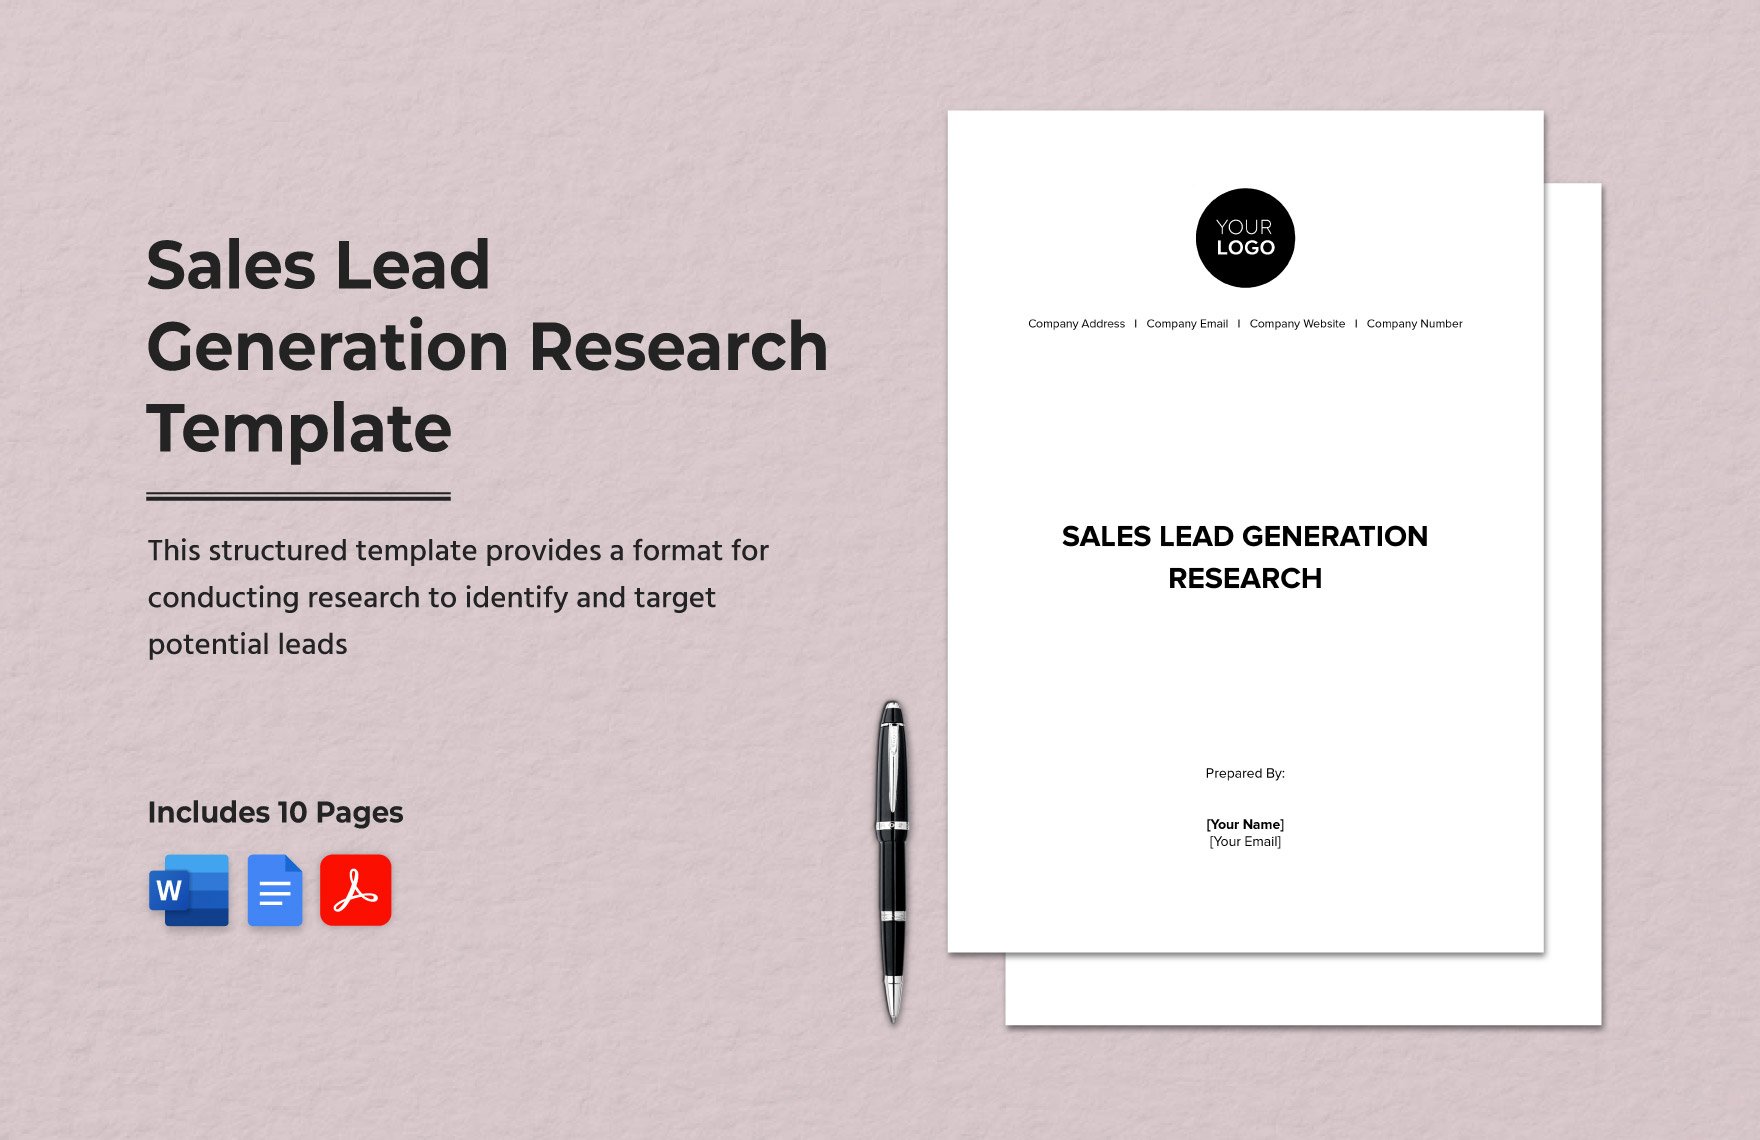  Sales Lead Generation Research Template